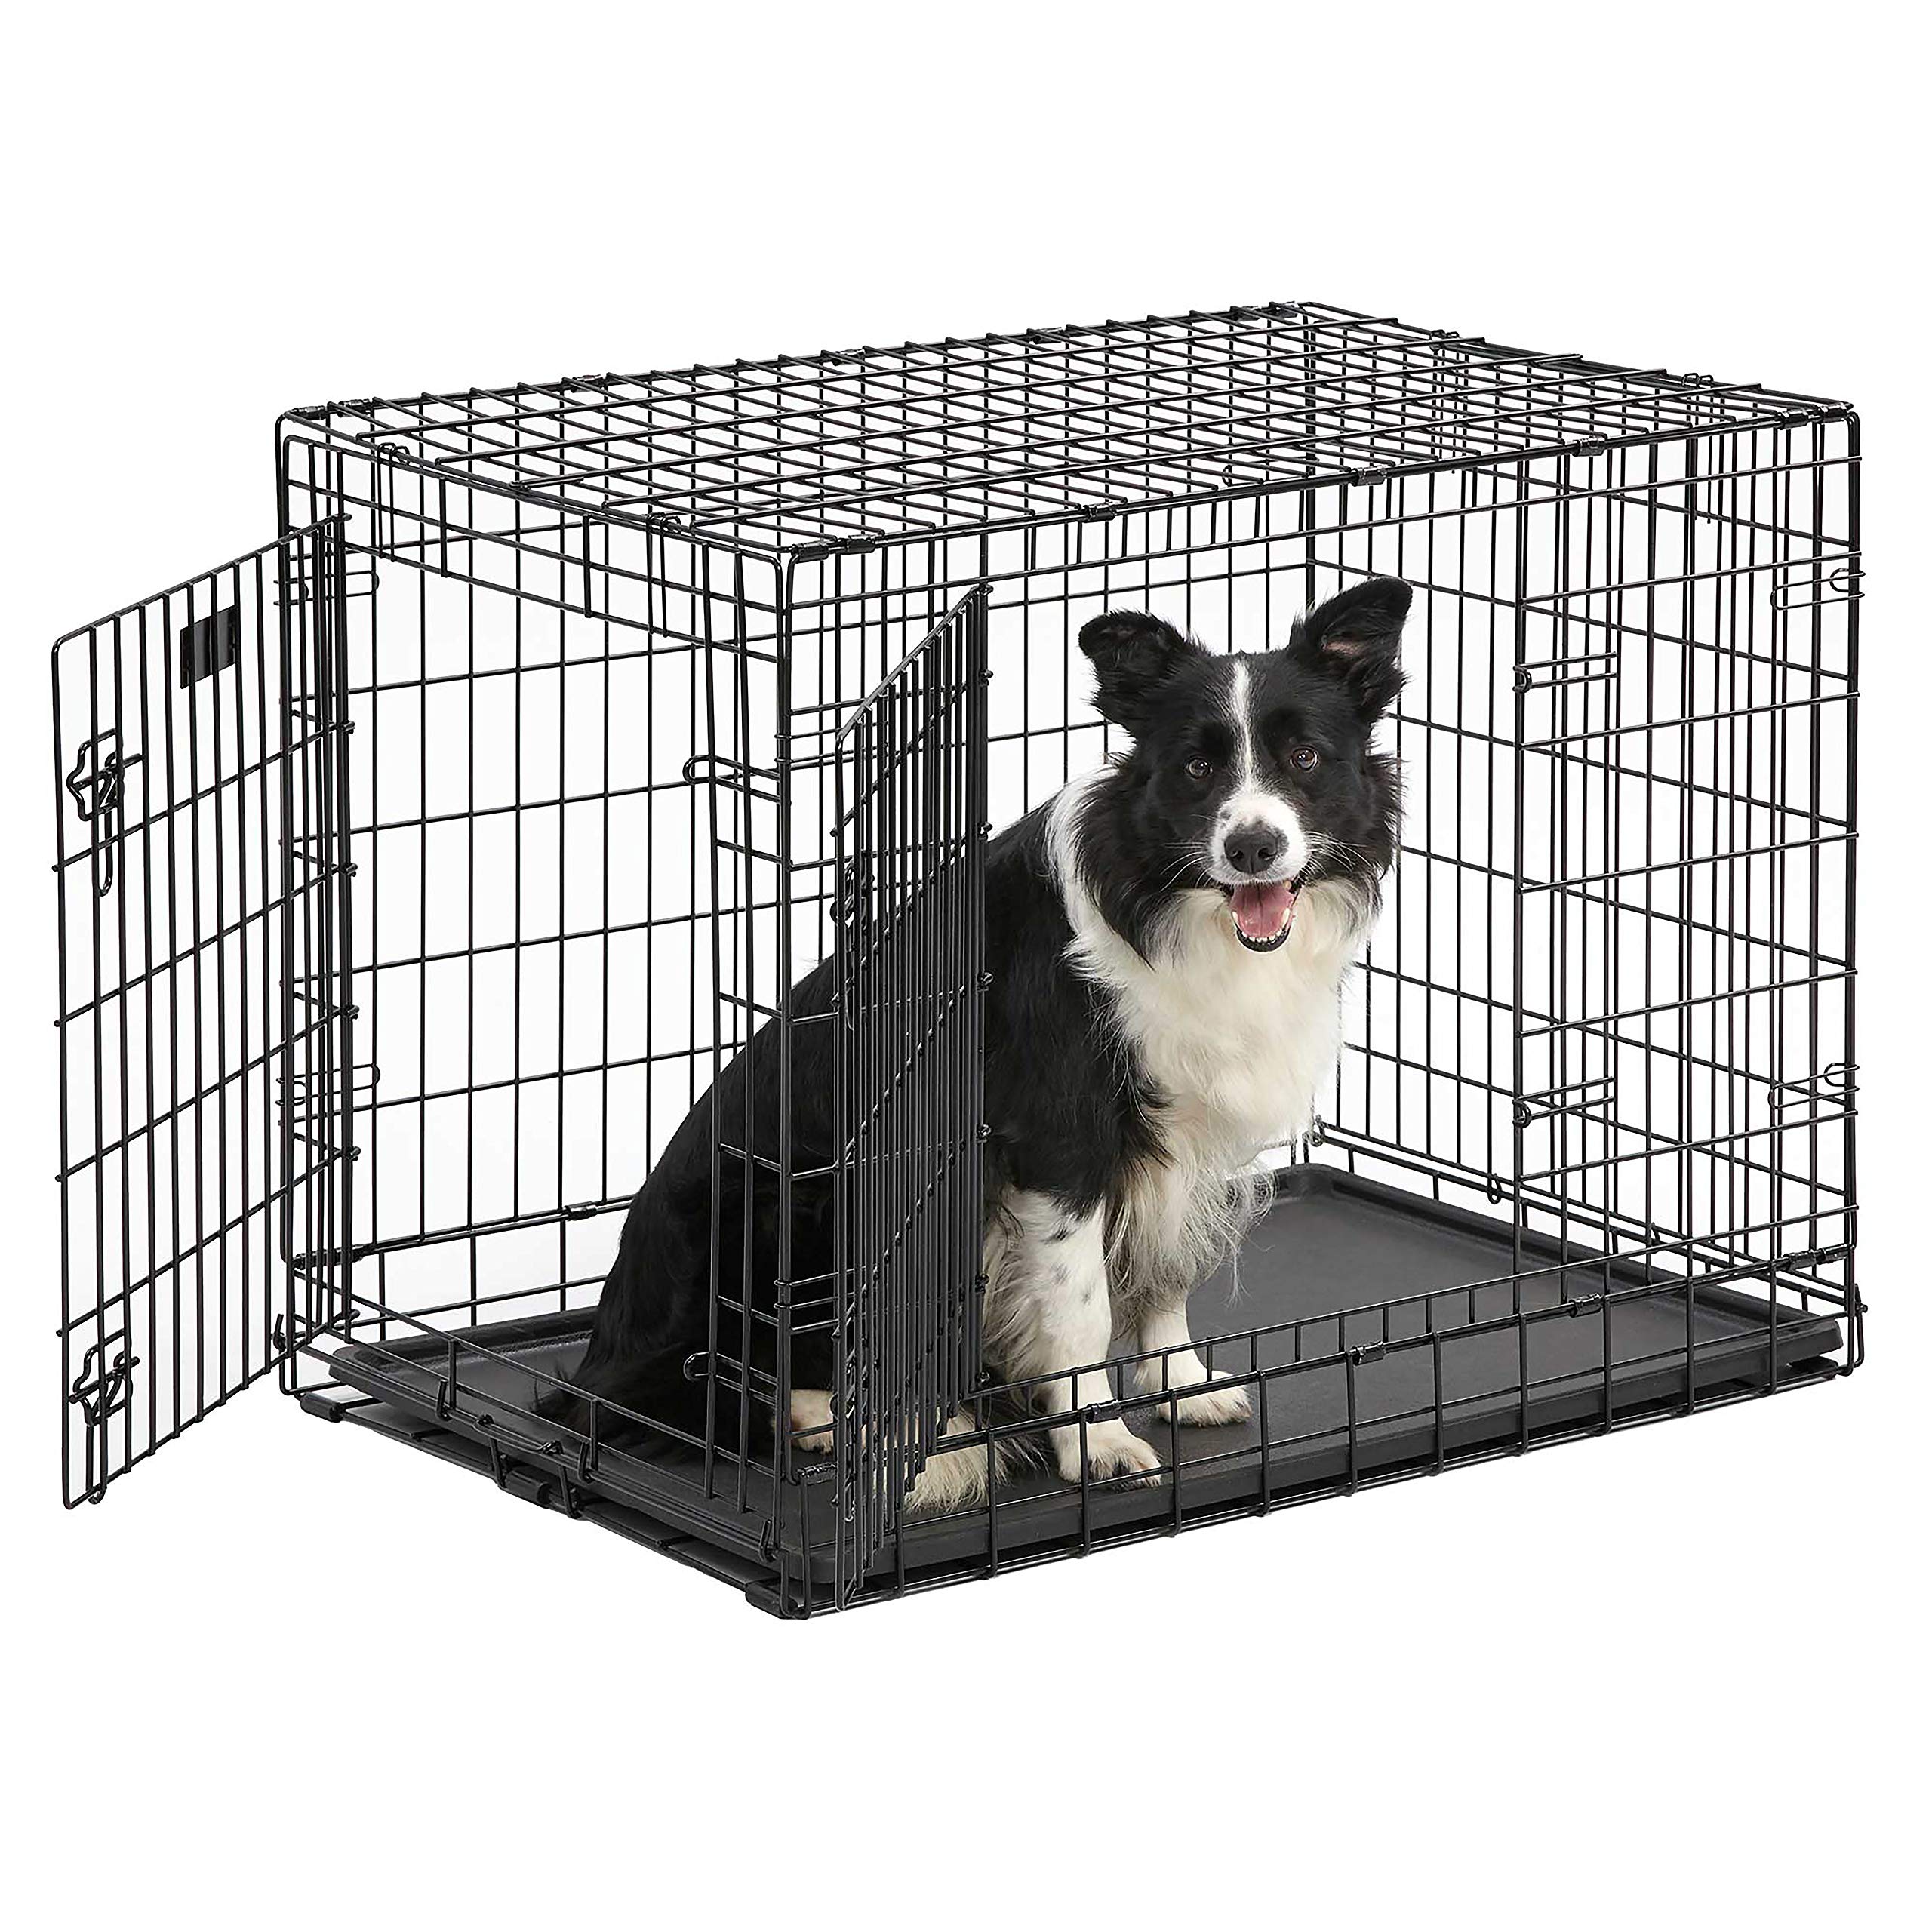 MidWest Homes for Pets Ultima Pro Series 36' Dog Crate | Extra-Strong Double Door Folding Metal Dog Crate w/Divider Panel, Floor Protecting 'Roller Feet' & Leak-Proof Plastic Pan